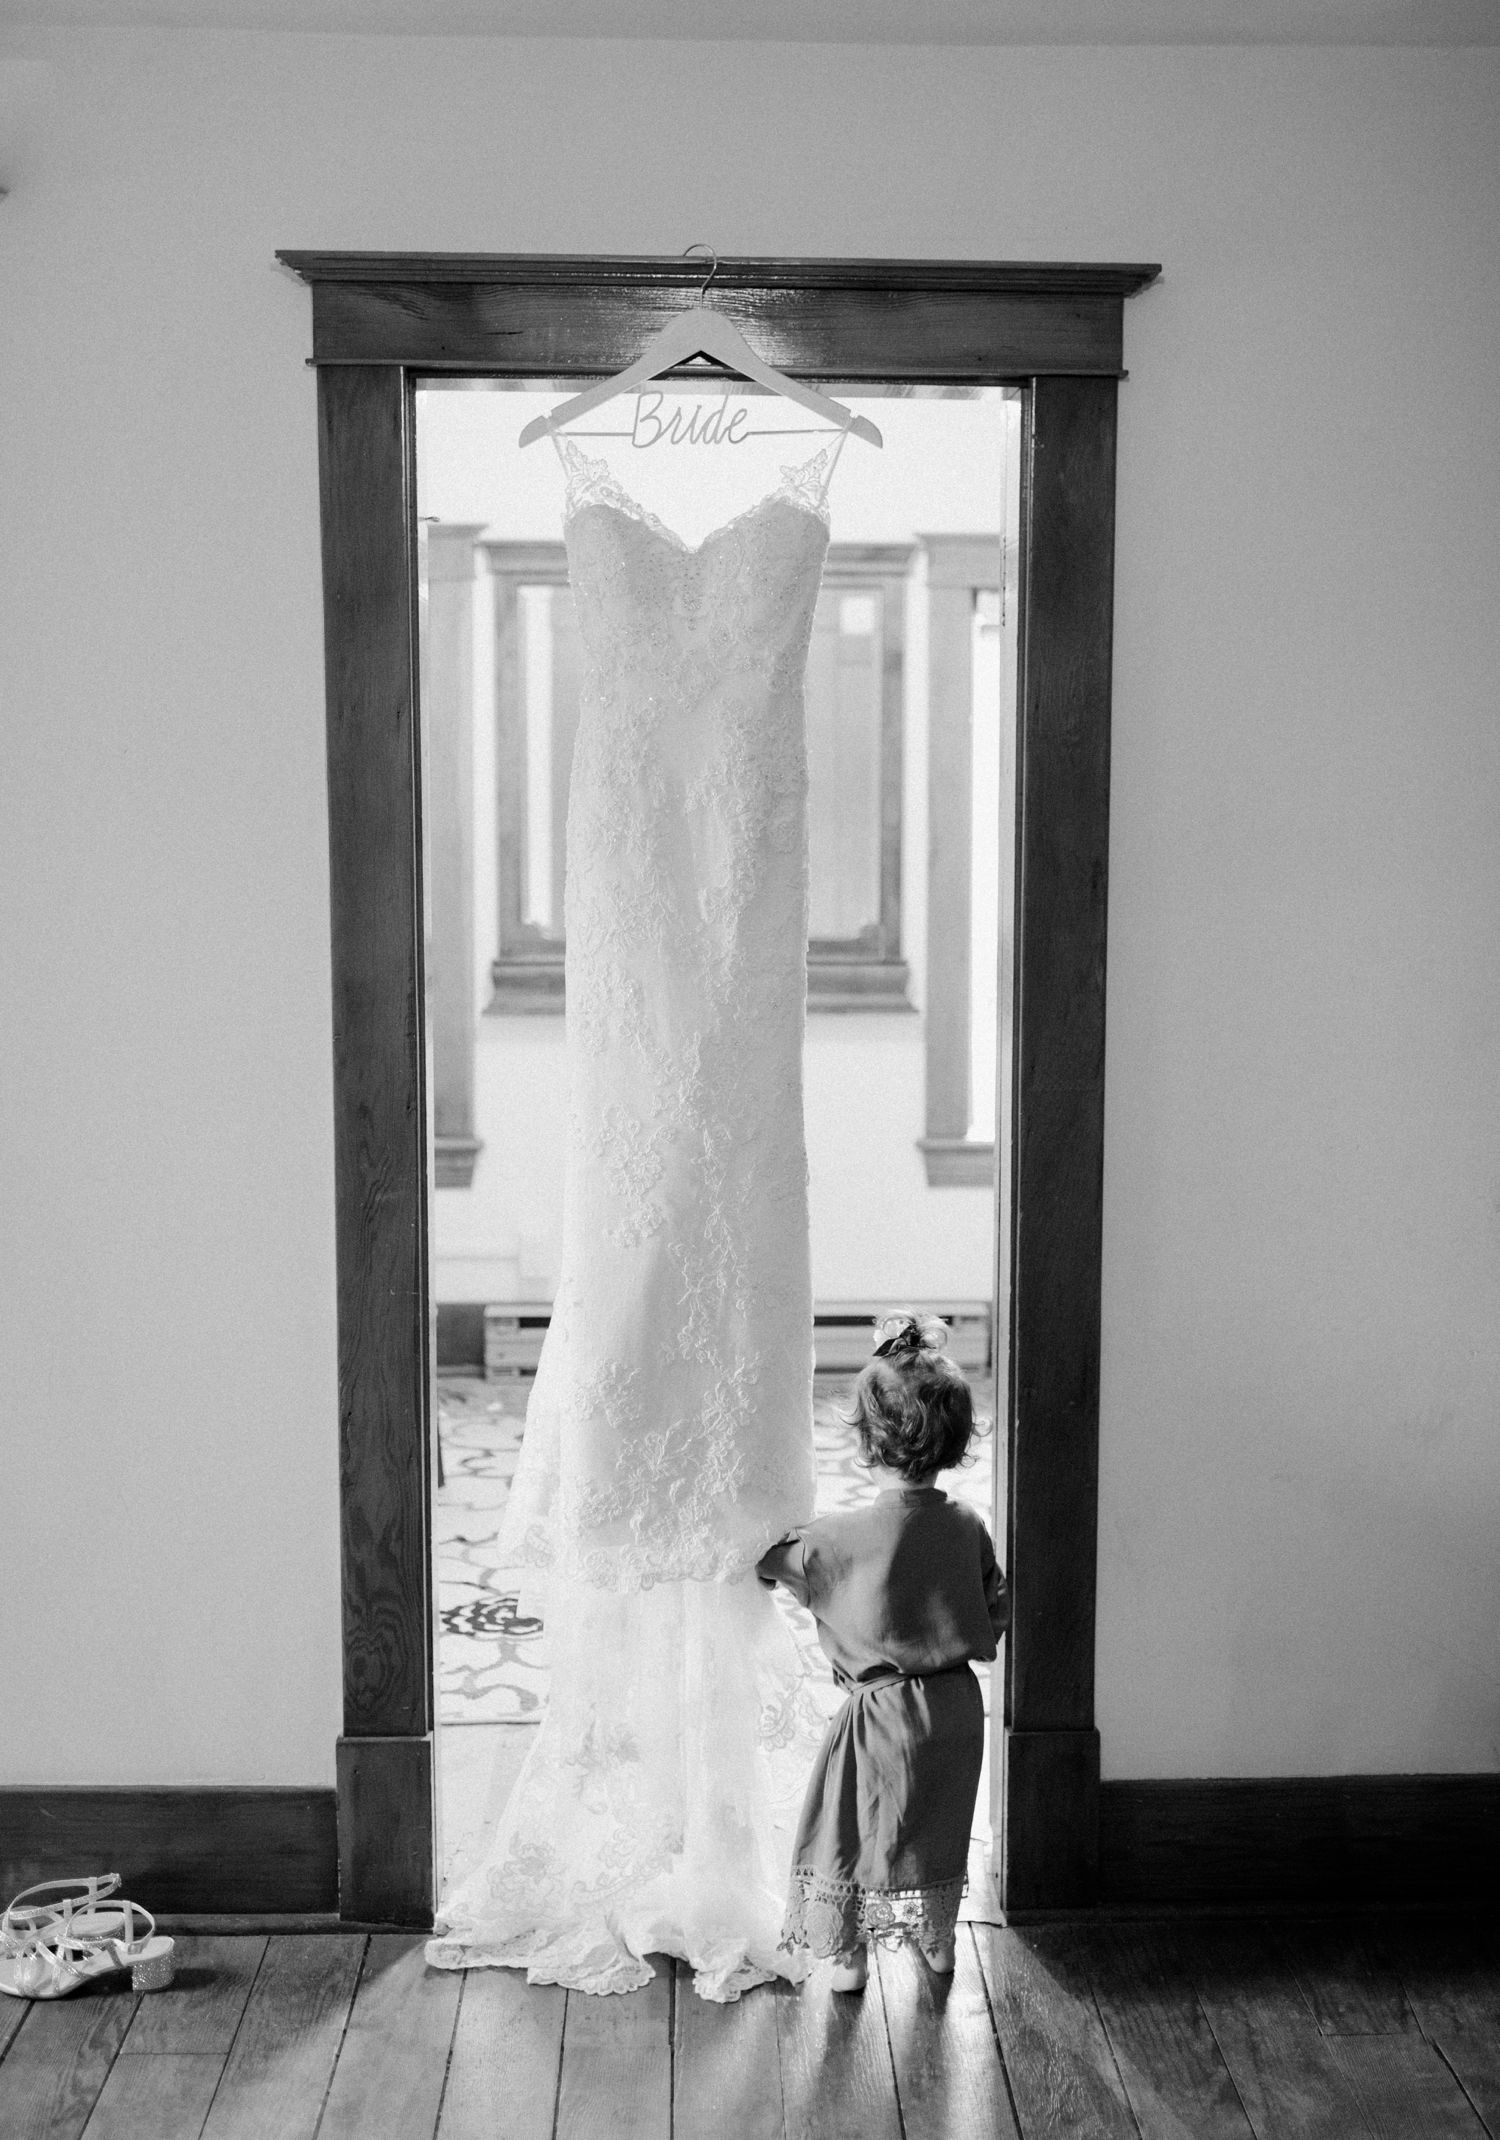 Flower girl standing by the bride's hanging dress. Shelby and Jesse celebrating their Evergreen village wedding in fall. Rustic boho wedding details. Photographed by Vanessa Renae Photography, a Winnipeg Wedding photographer